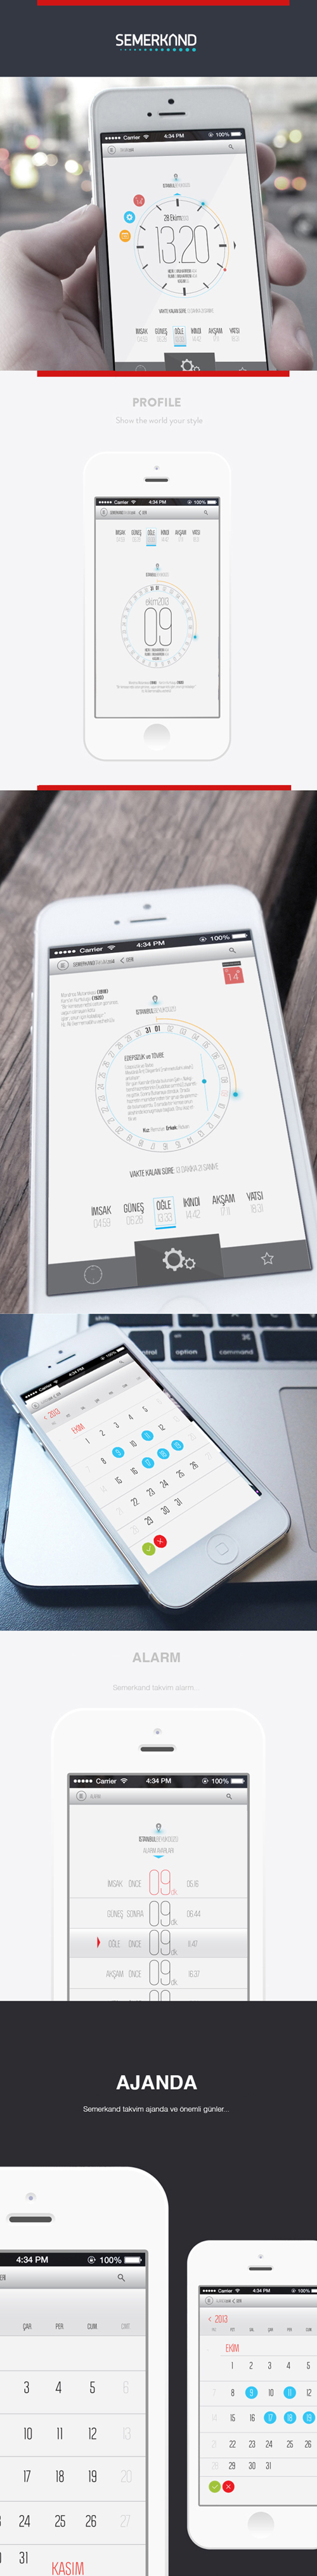 Amazing Mobile App UI Designs with Ultimate User Experience - 5